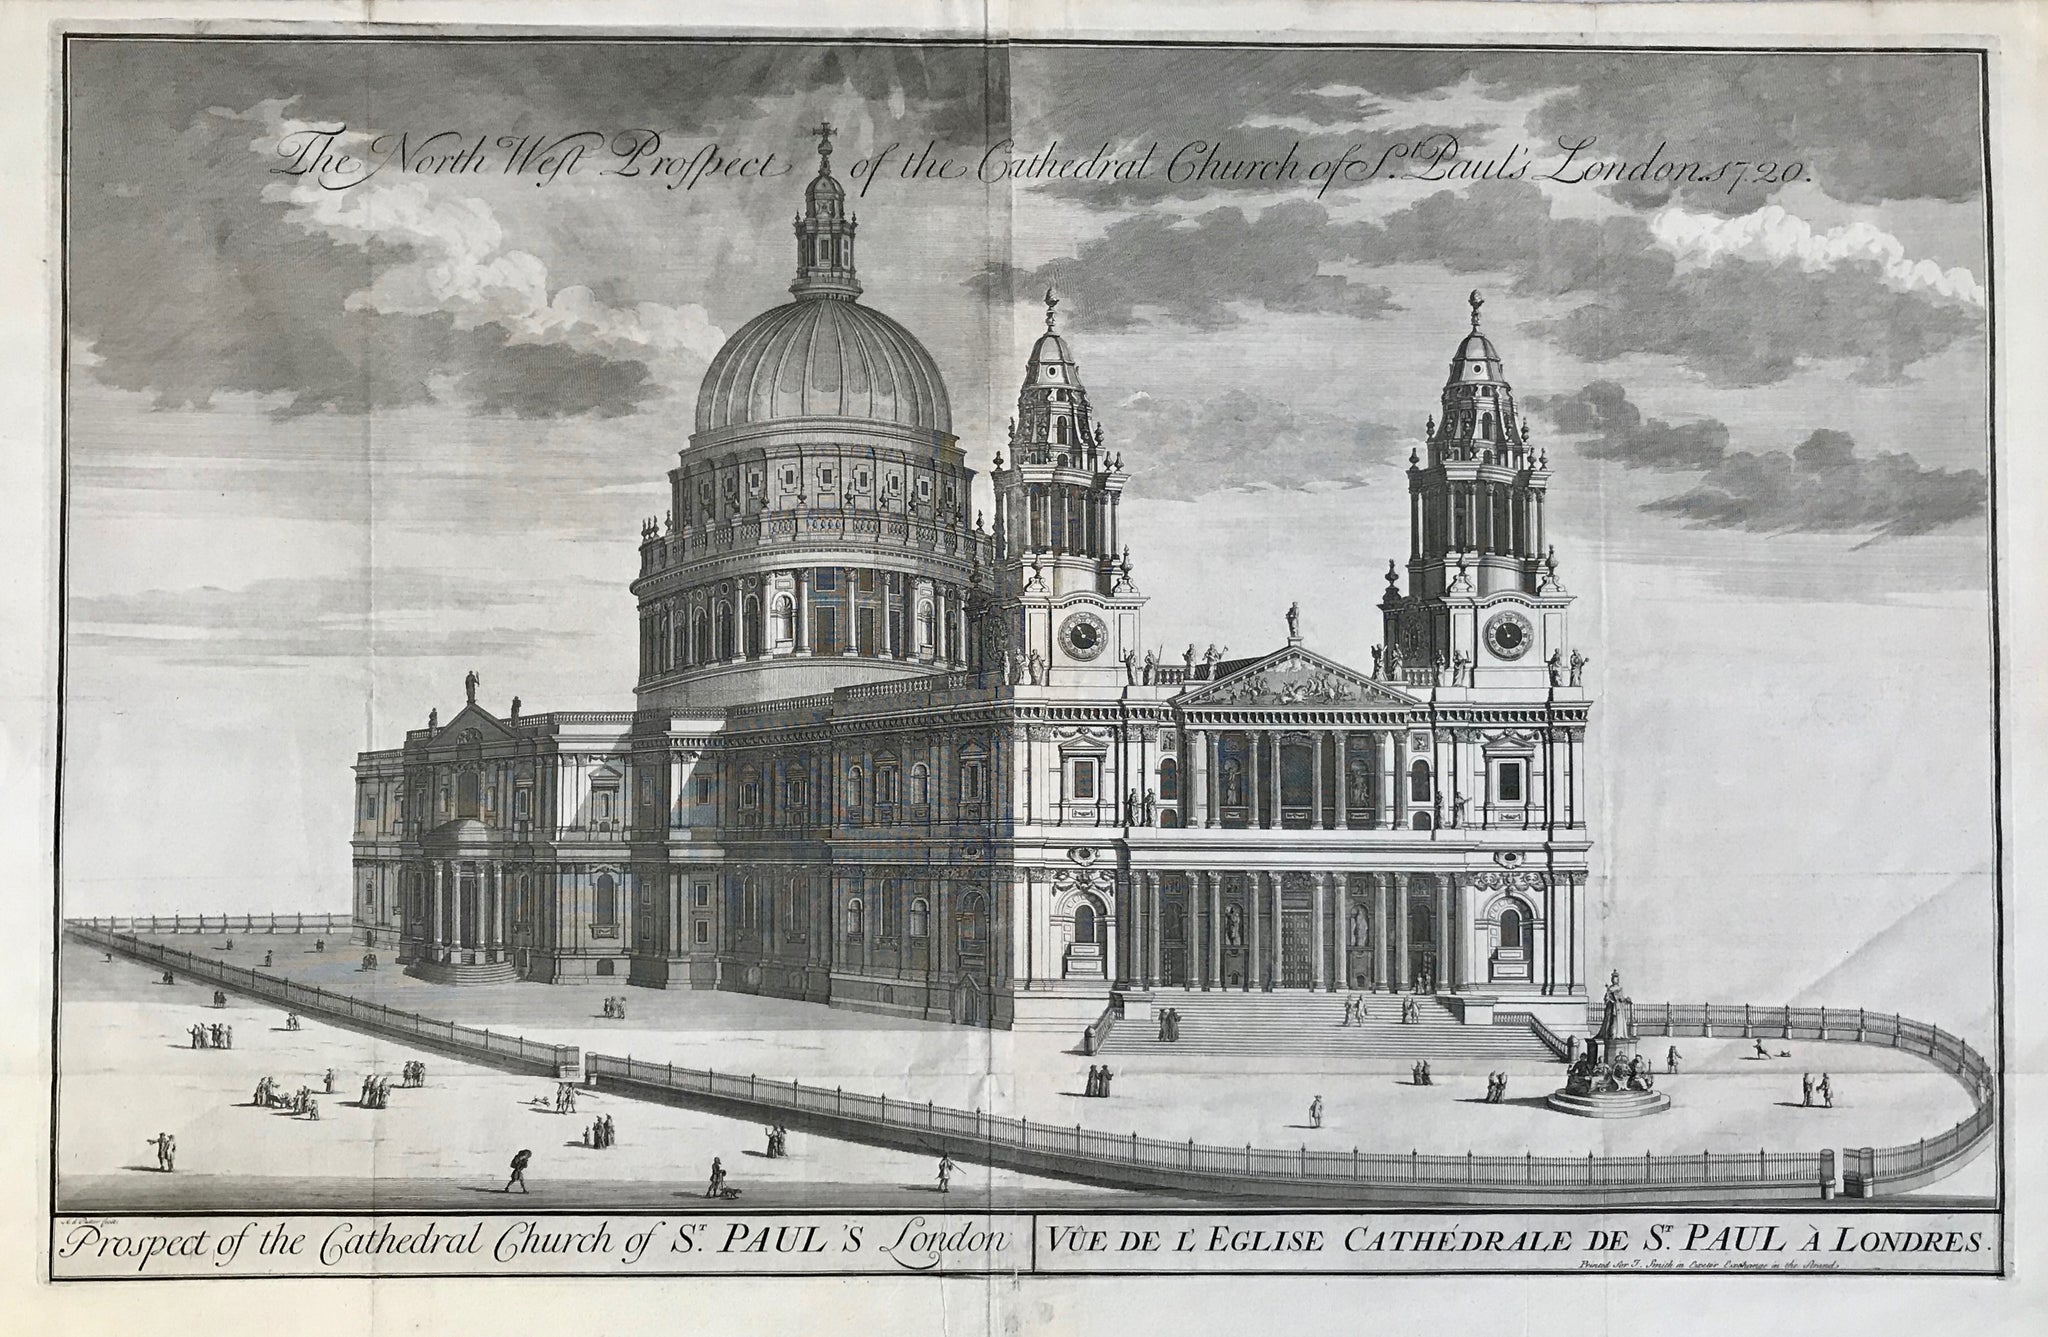 "The North West Project of the Cathdral Church of St. Paul's London, 1720"  Title below print inside print marks:  "Prospect of Cathedral Church of St. Paul's London / Vue de l'Eglise Cathedrale de St. Paul a Londres"  Copper etching by Albert de Putter (1682-1754)  At bottom it says: "Printed for J. Smith in Exeter Exchange in the Strand".  London, 1720  John Smith 